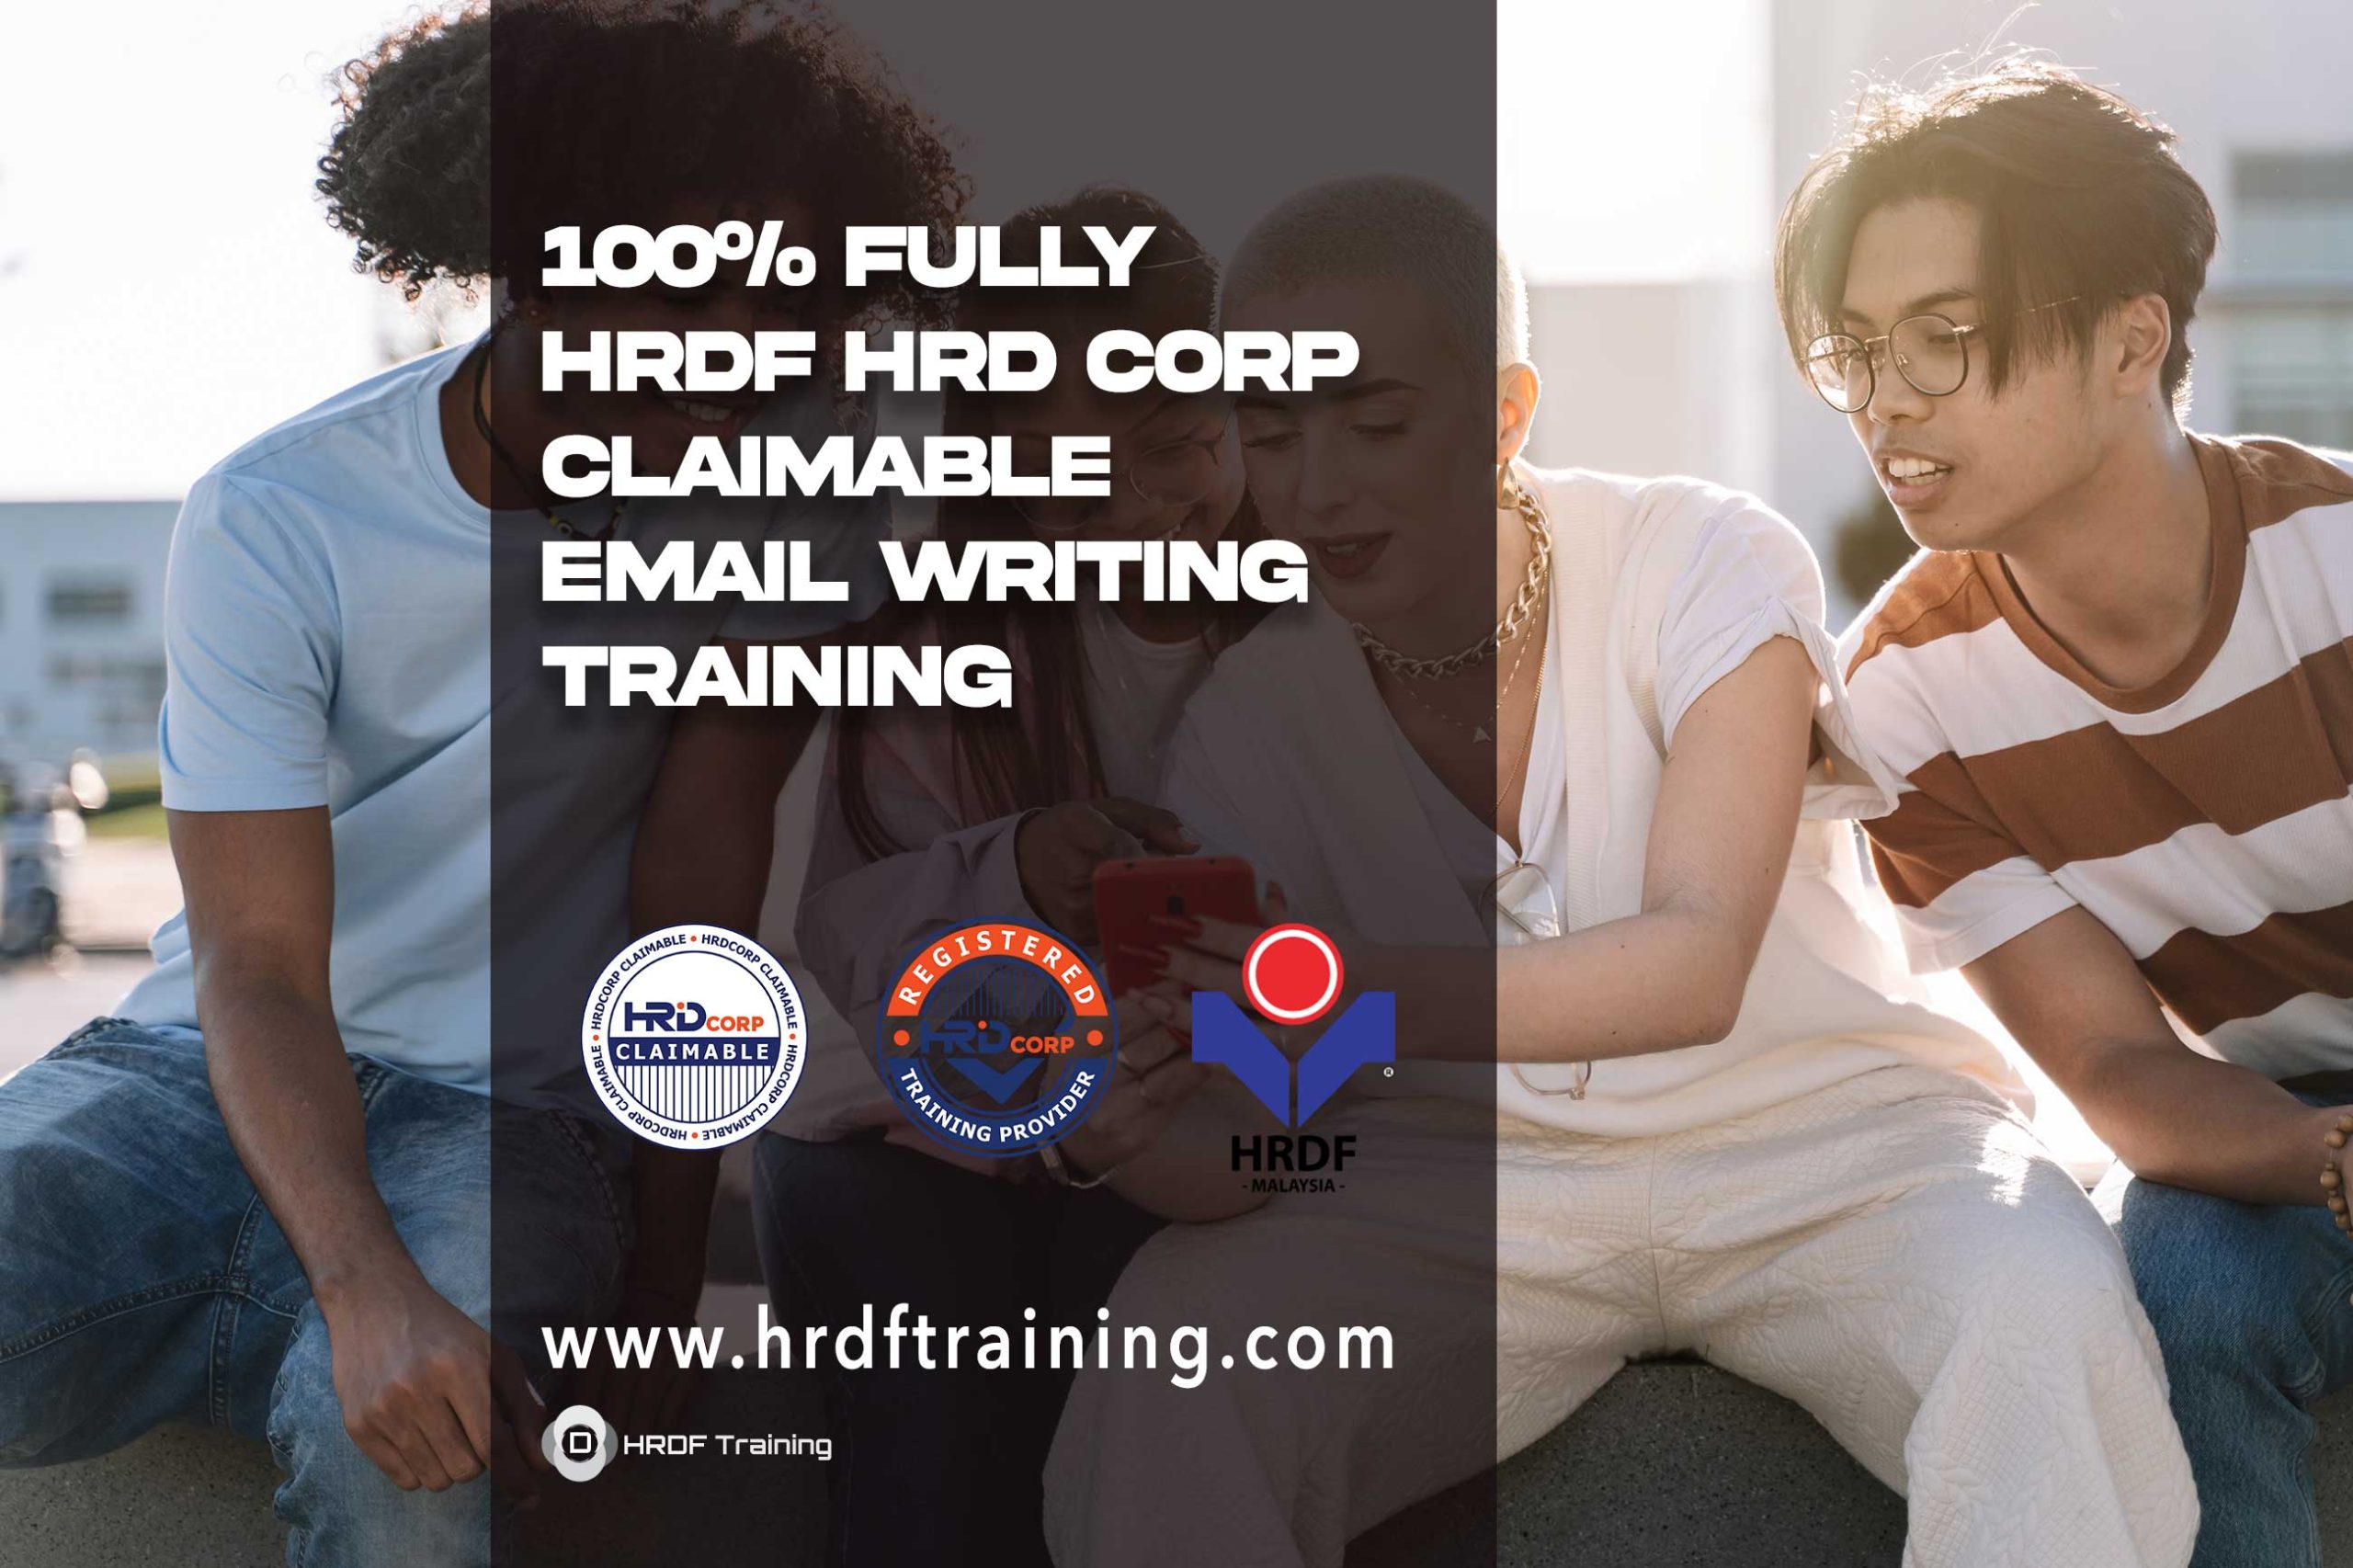 HRDF-HRD-Corp-Claimable-Email-Writing-Training